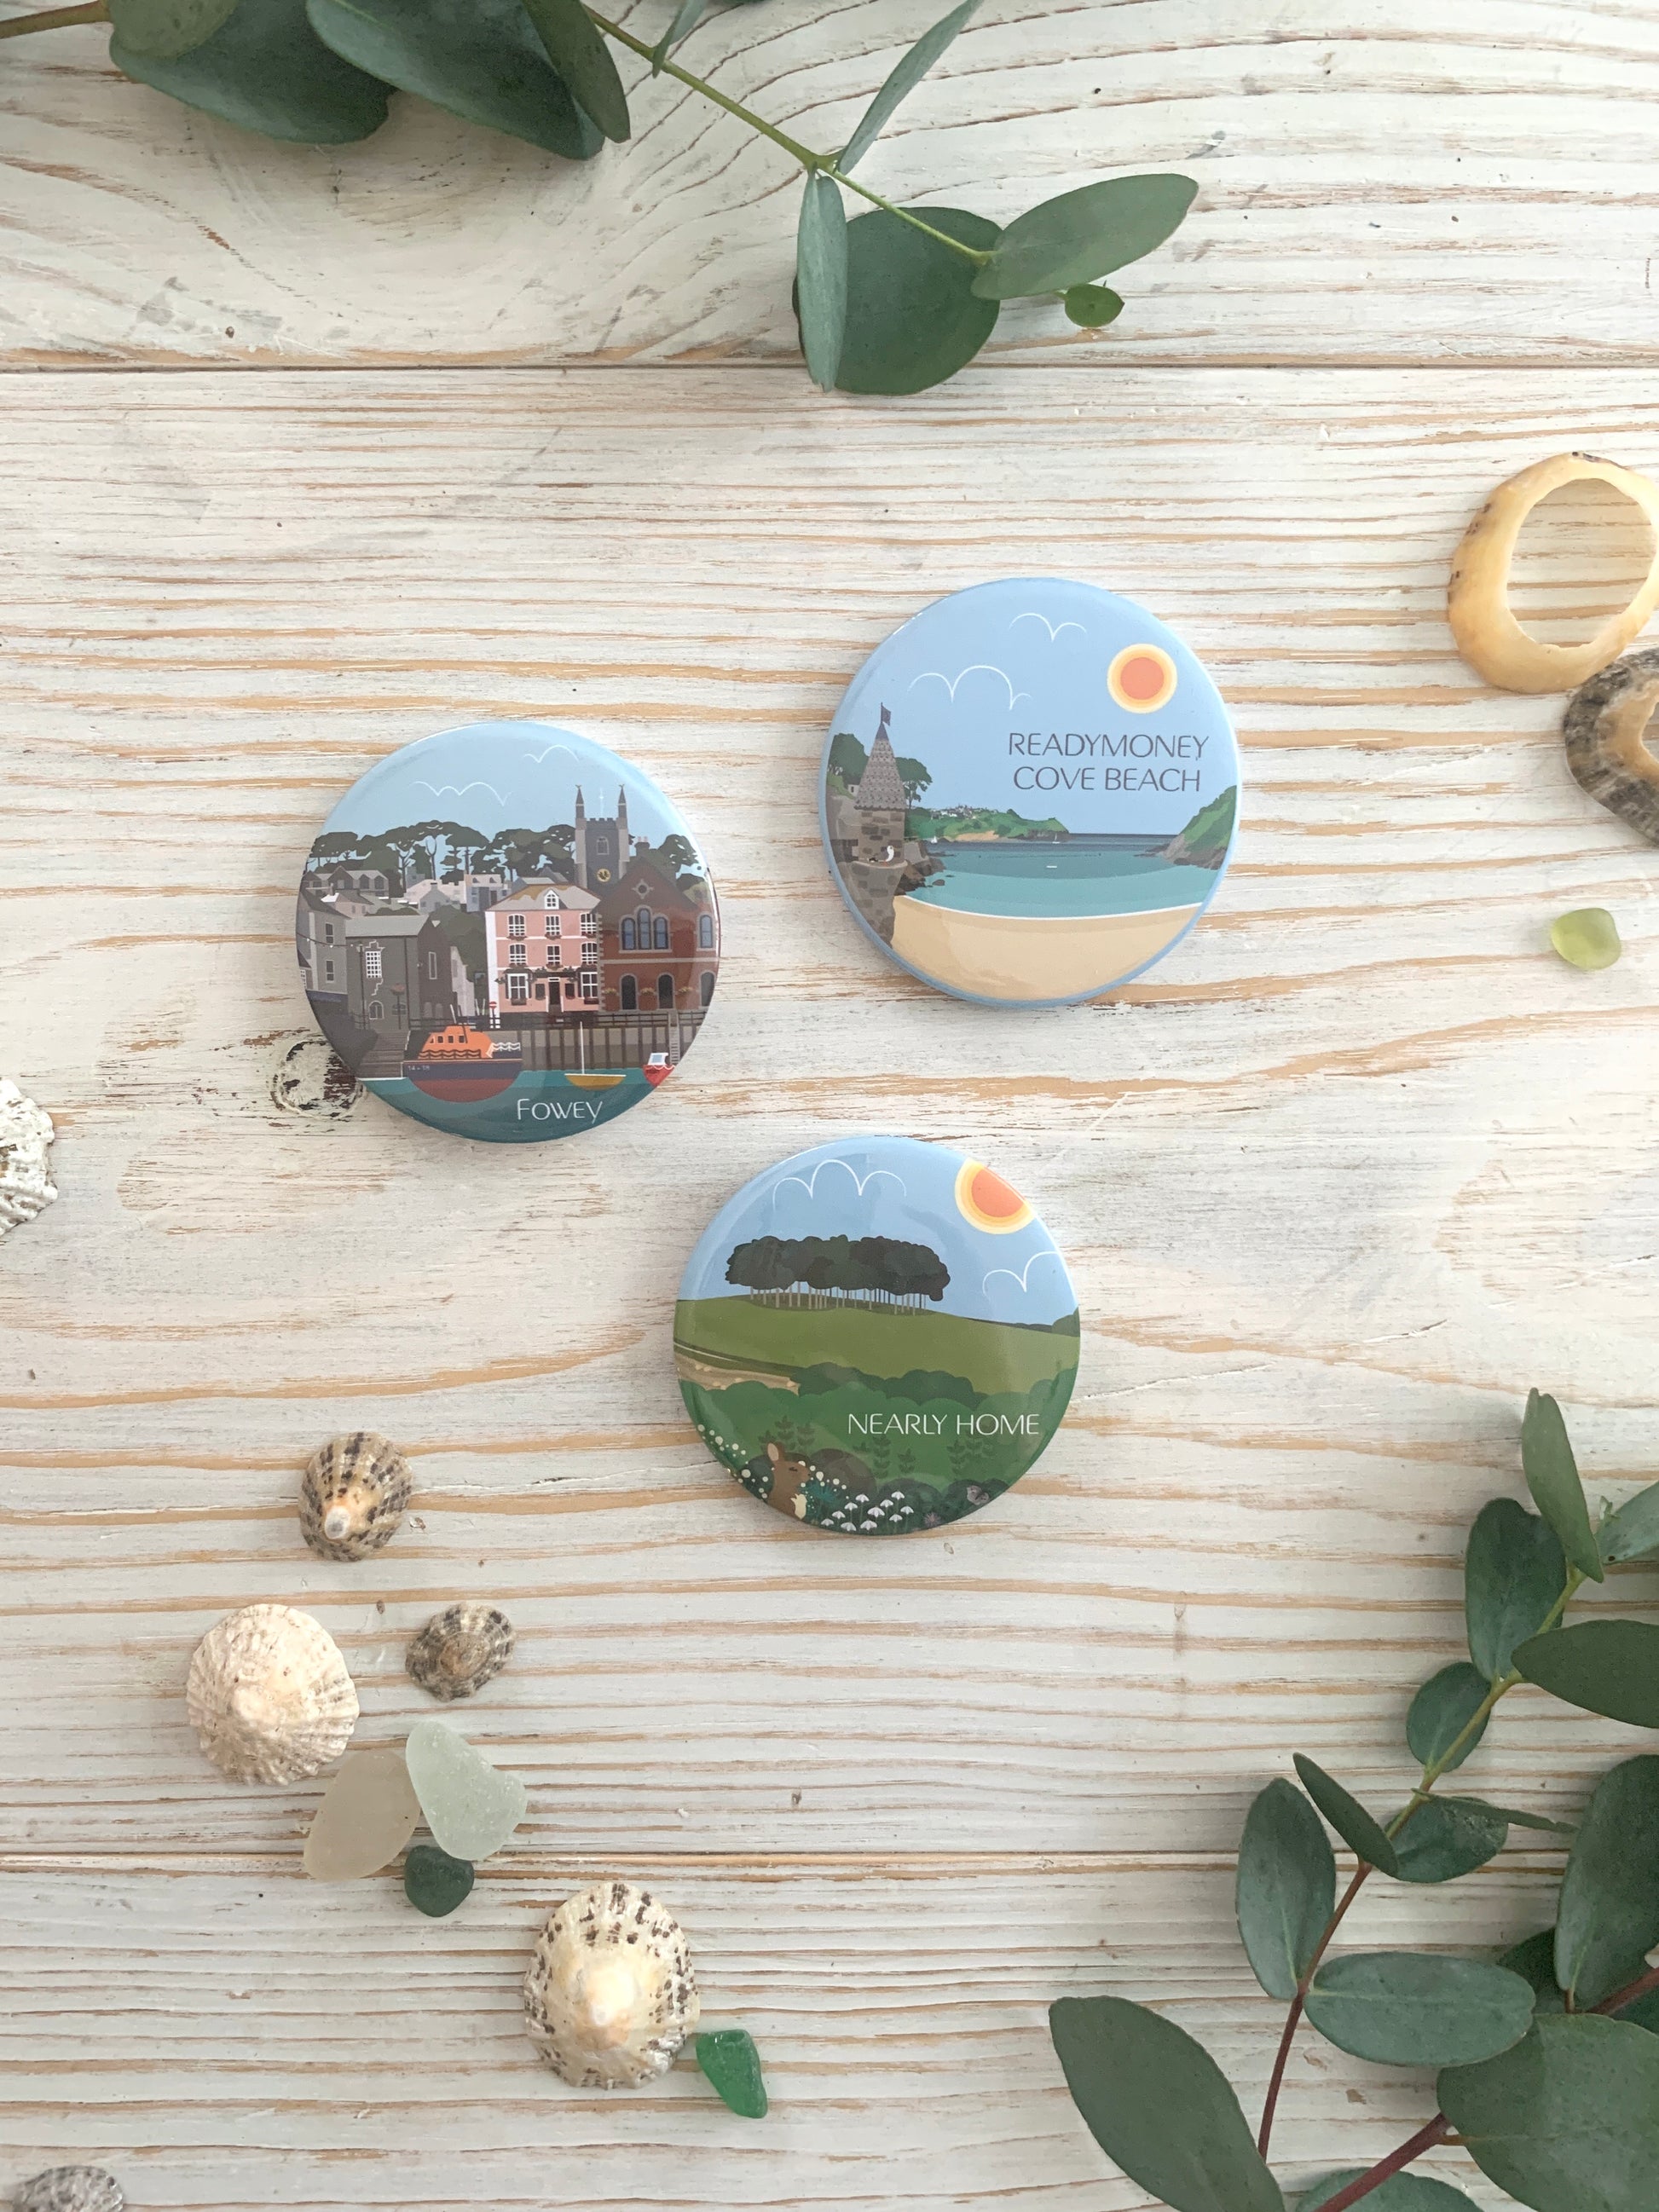 Three colourful fridge magnets depicting Readymoney Cove, Fowey's Town Quay and the Nearly Home Trees